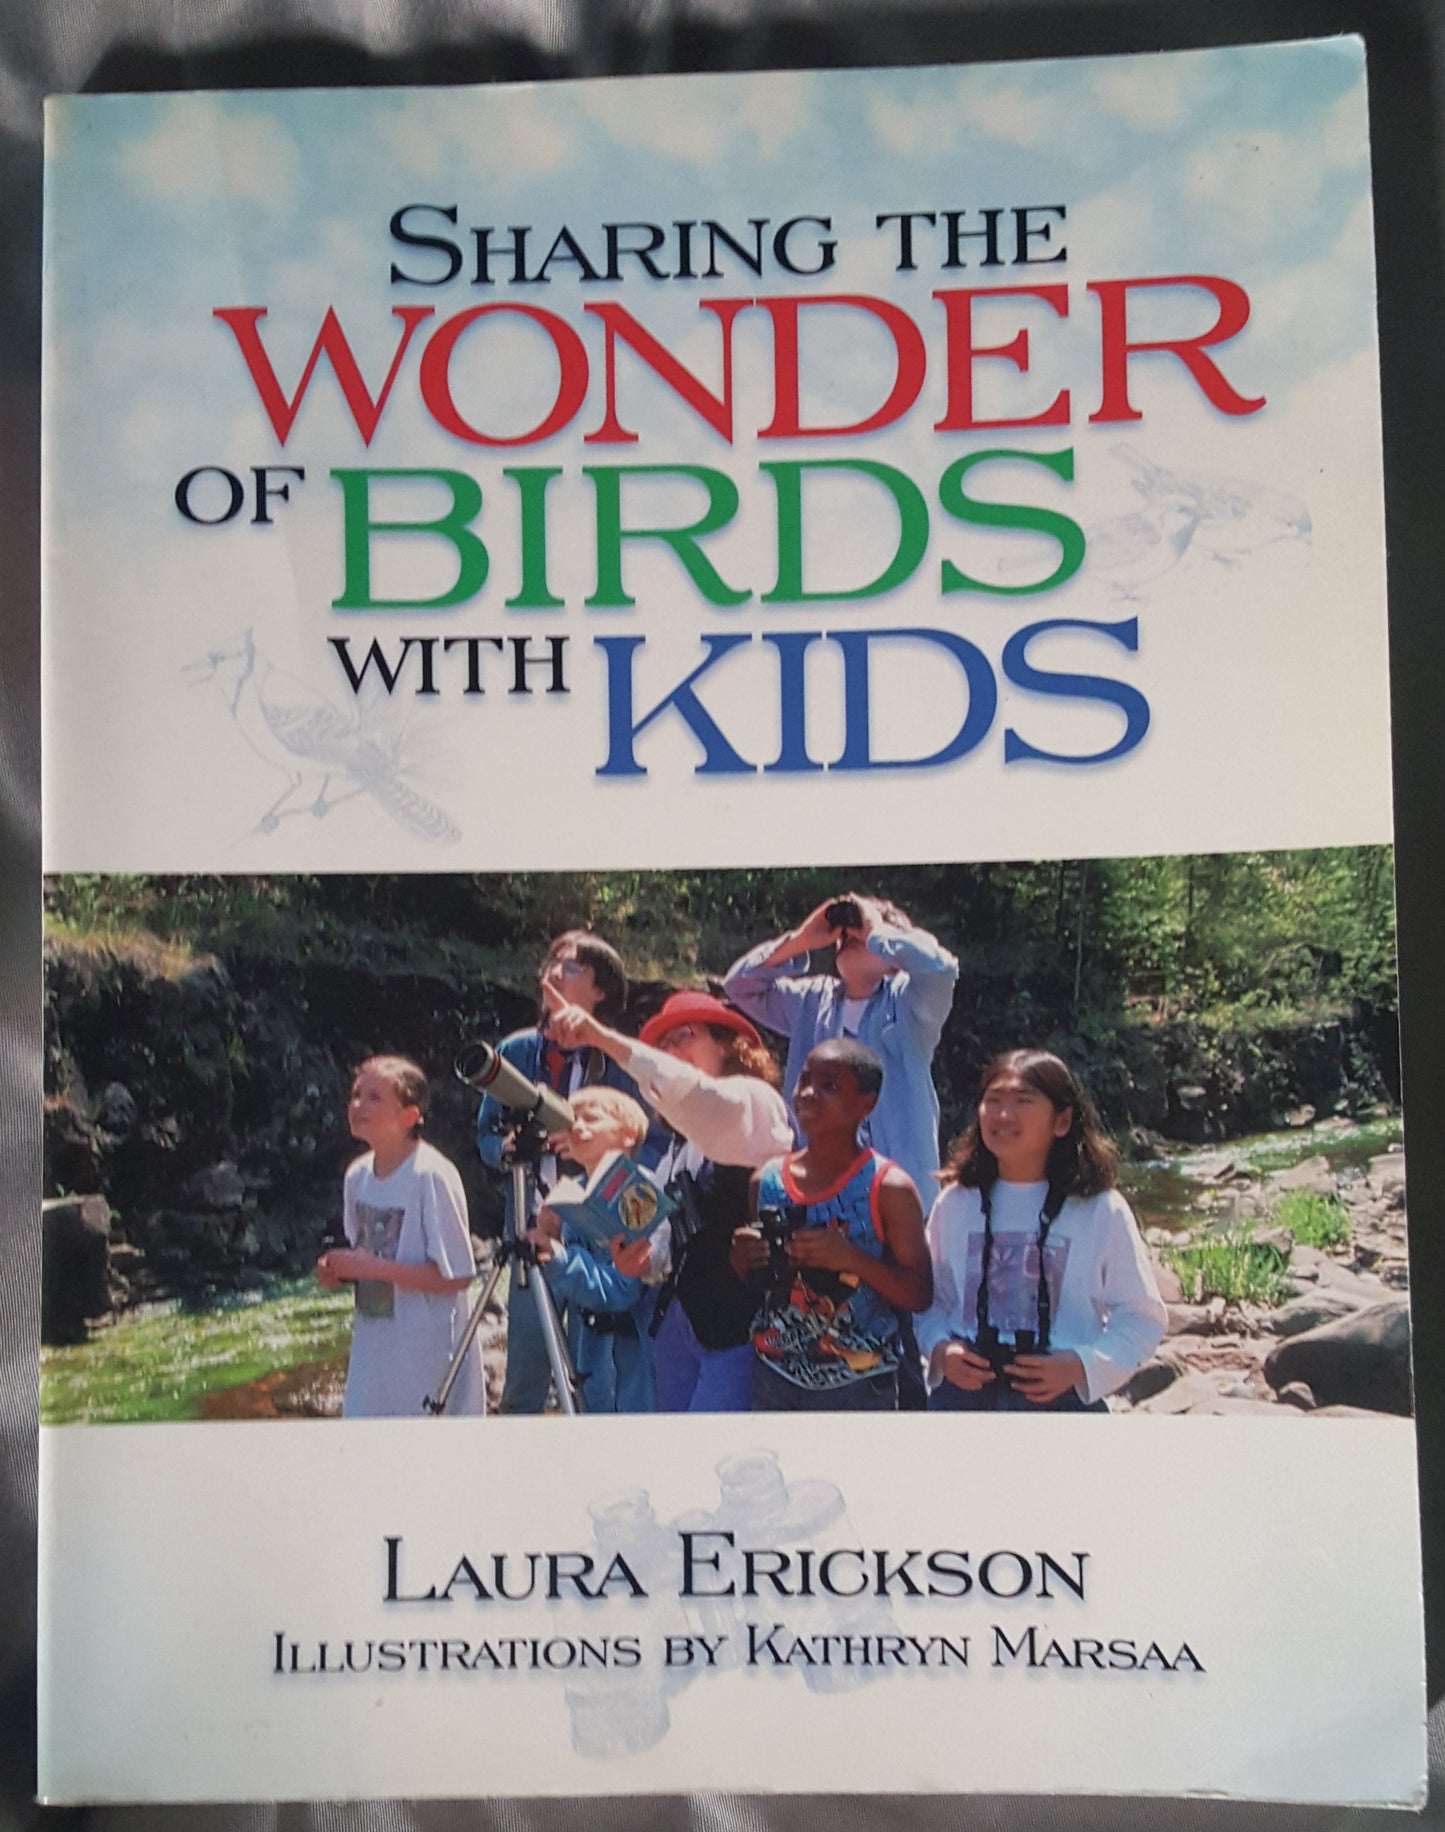 Sharing the Wonder of Birds with Kids